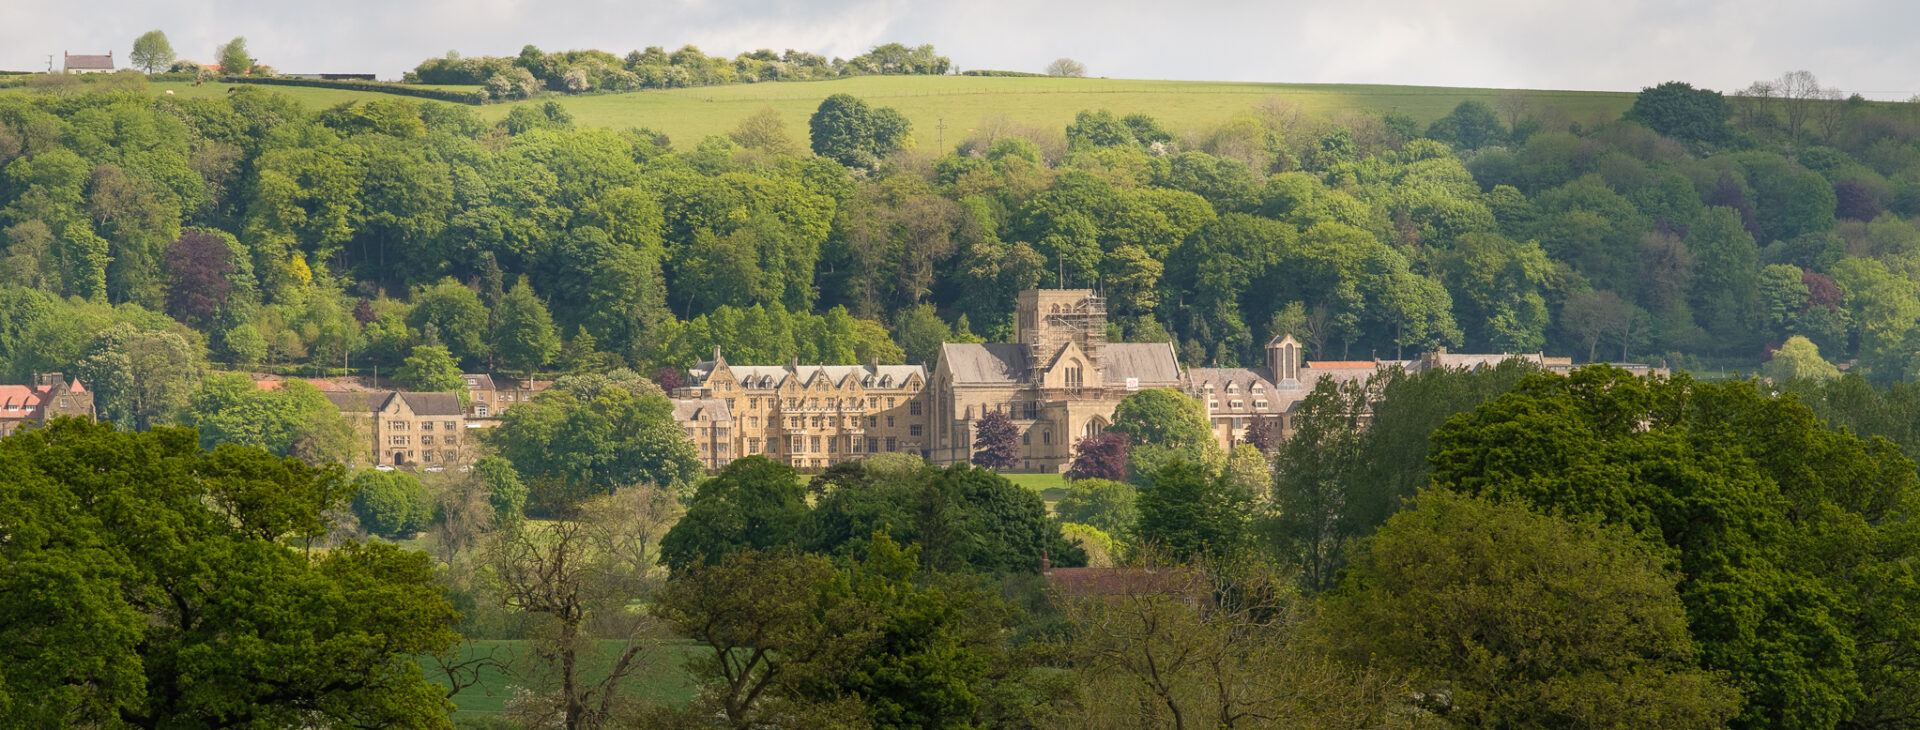 Ampleforth school, abbey and college across the valley.